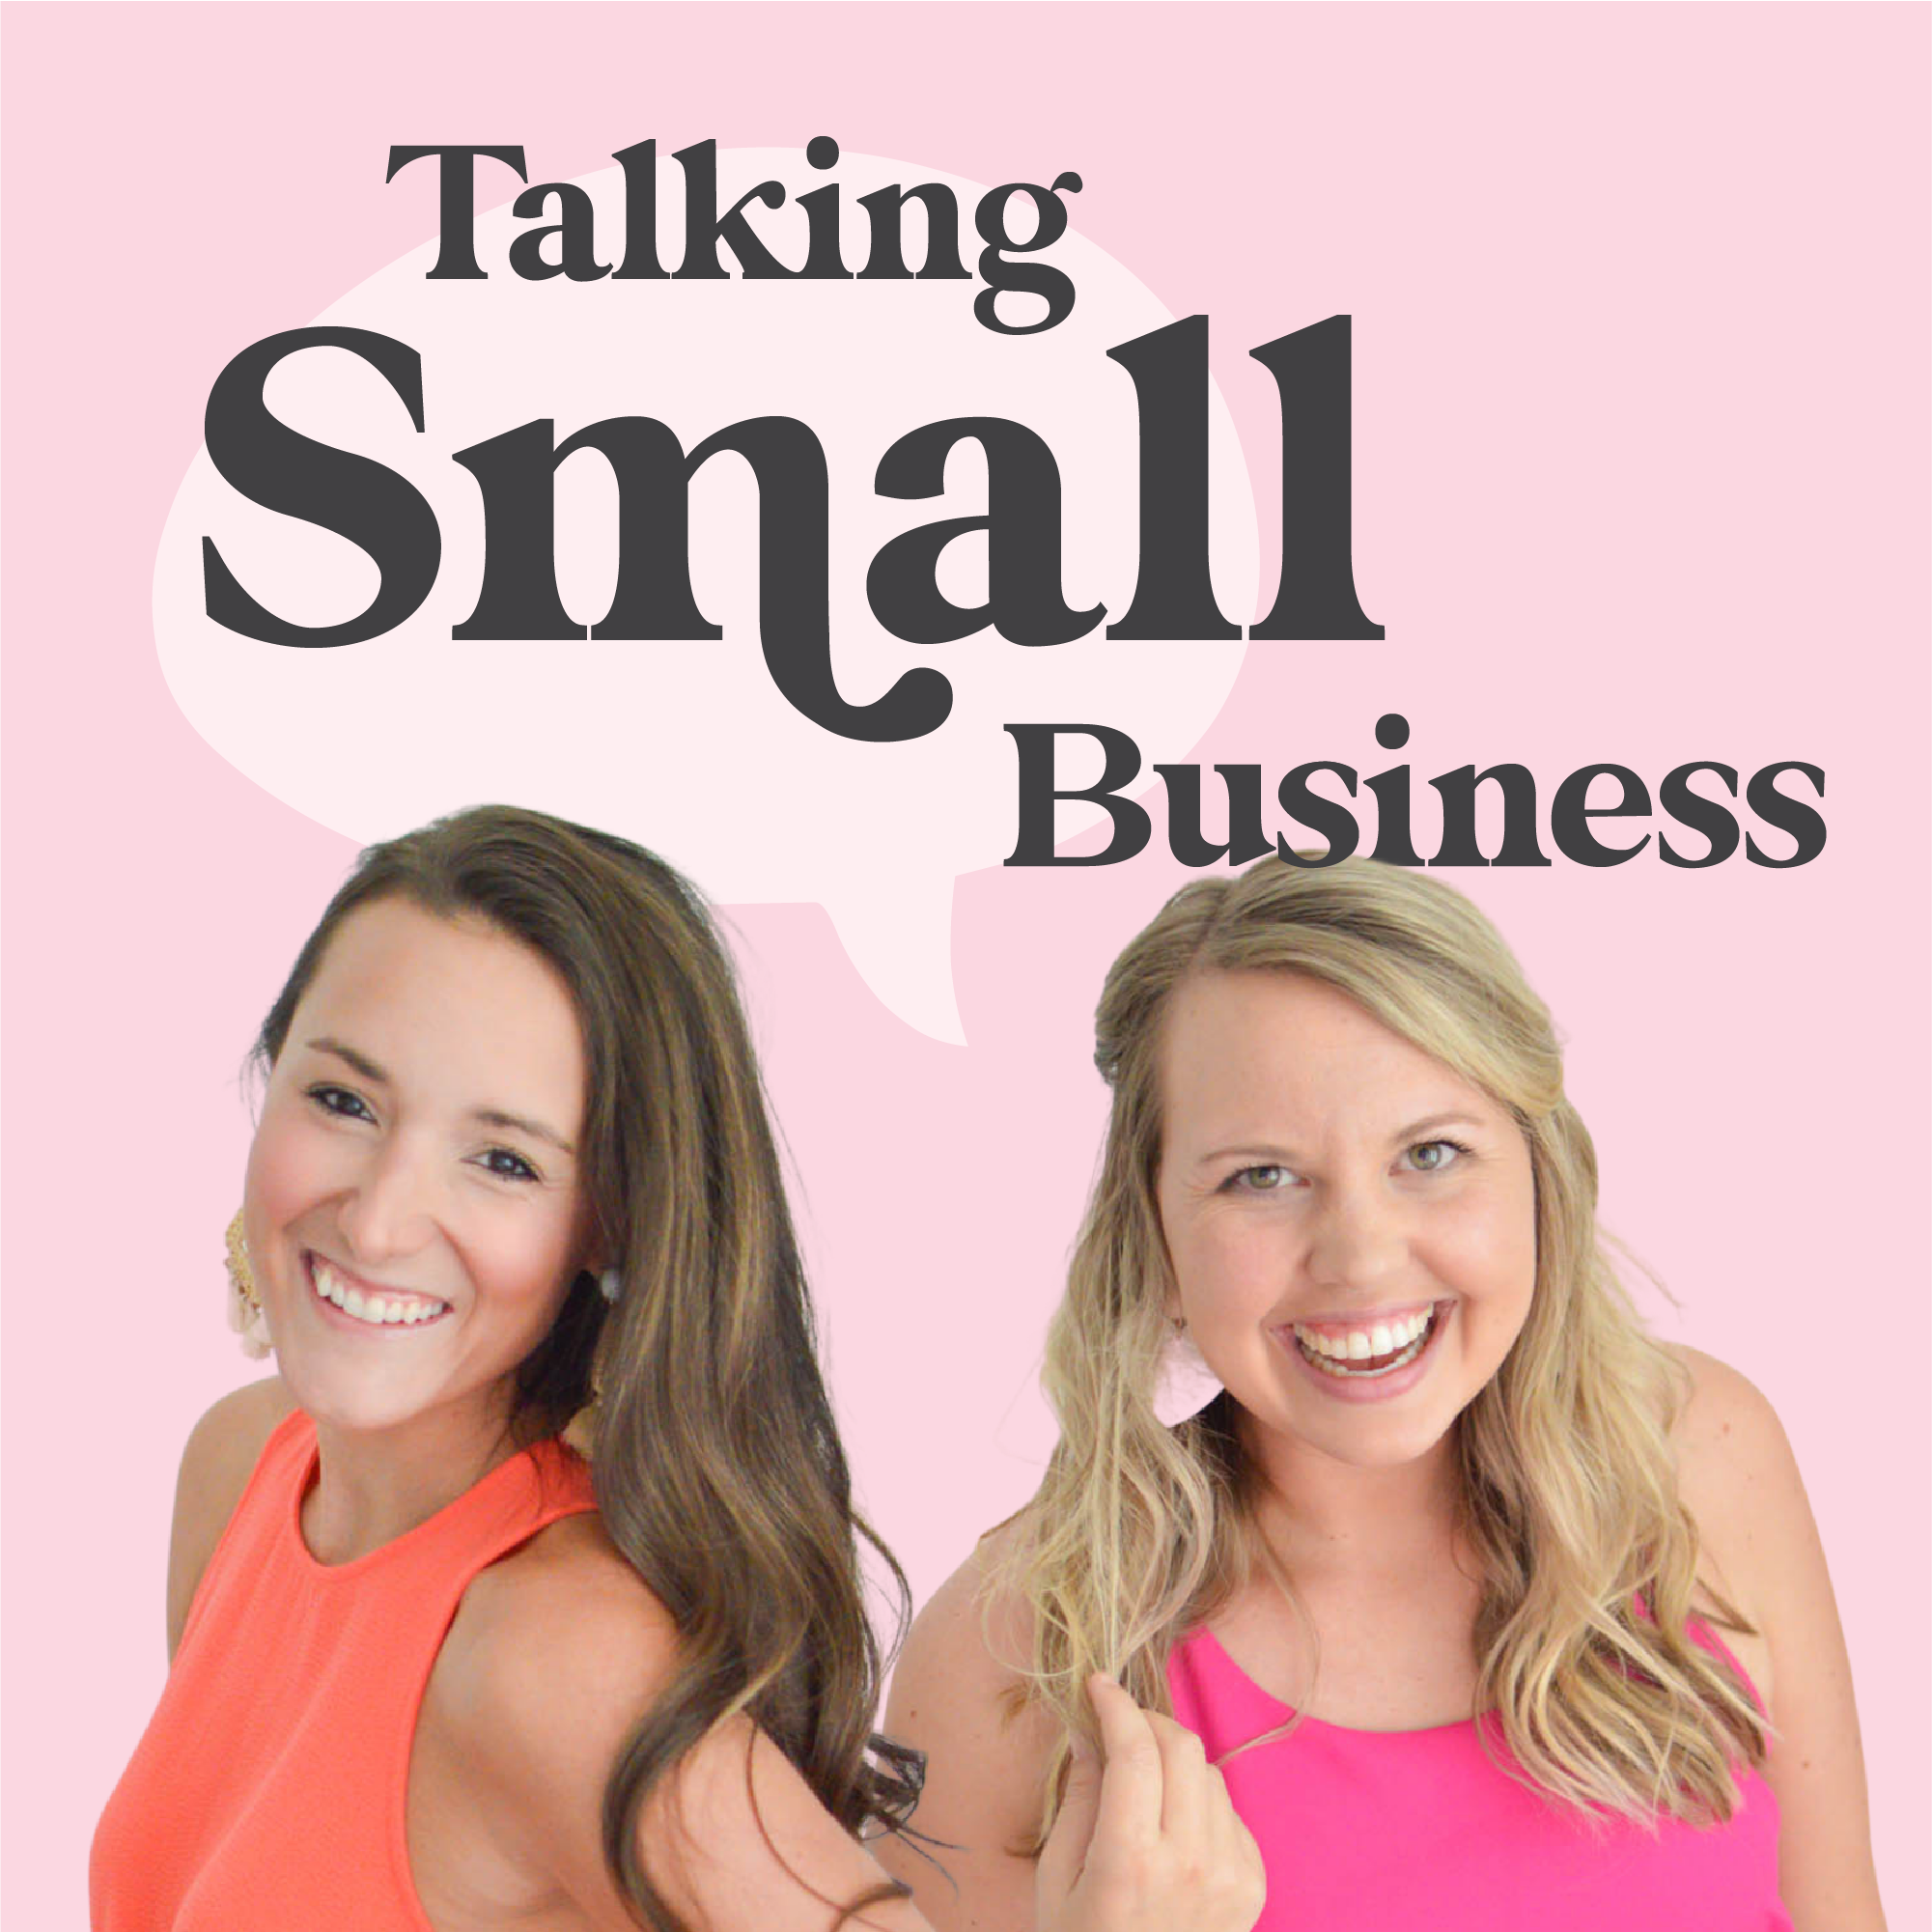 Talking Small Business podcast is live